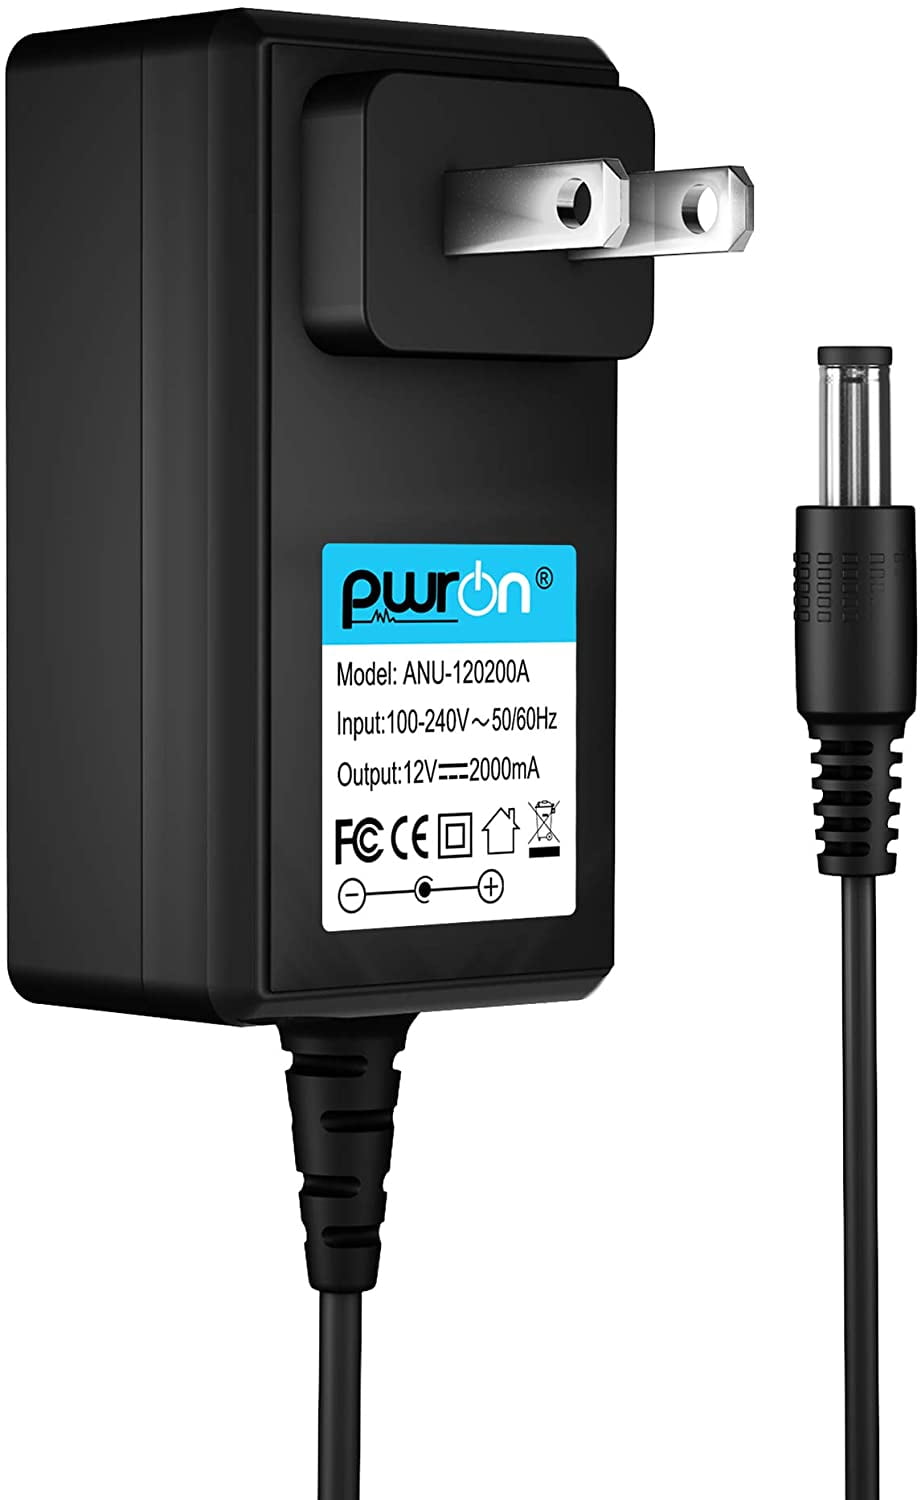 PwrON 12V Charger for Mini (1st Gen ONLY) Speaker 359037-1300 371071-0011 Power Cord SoundDock XT 626209-1300 PSA10F-120 Replacement Soundlink Mini Charger Cord - Walmart.com